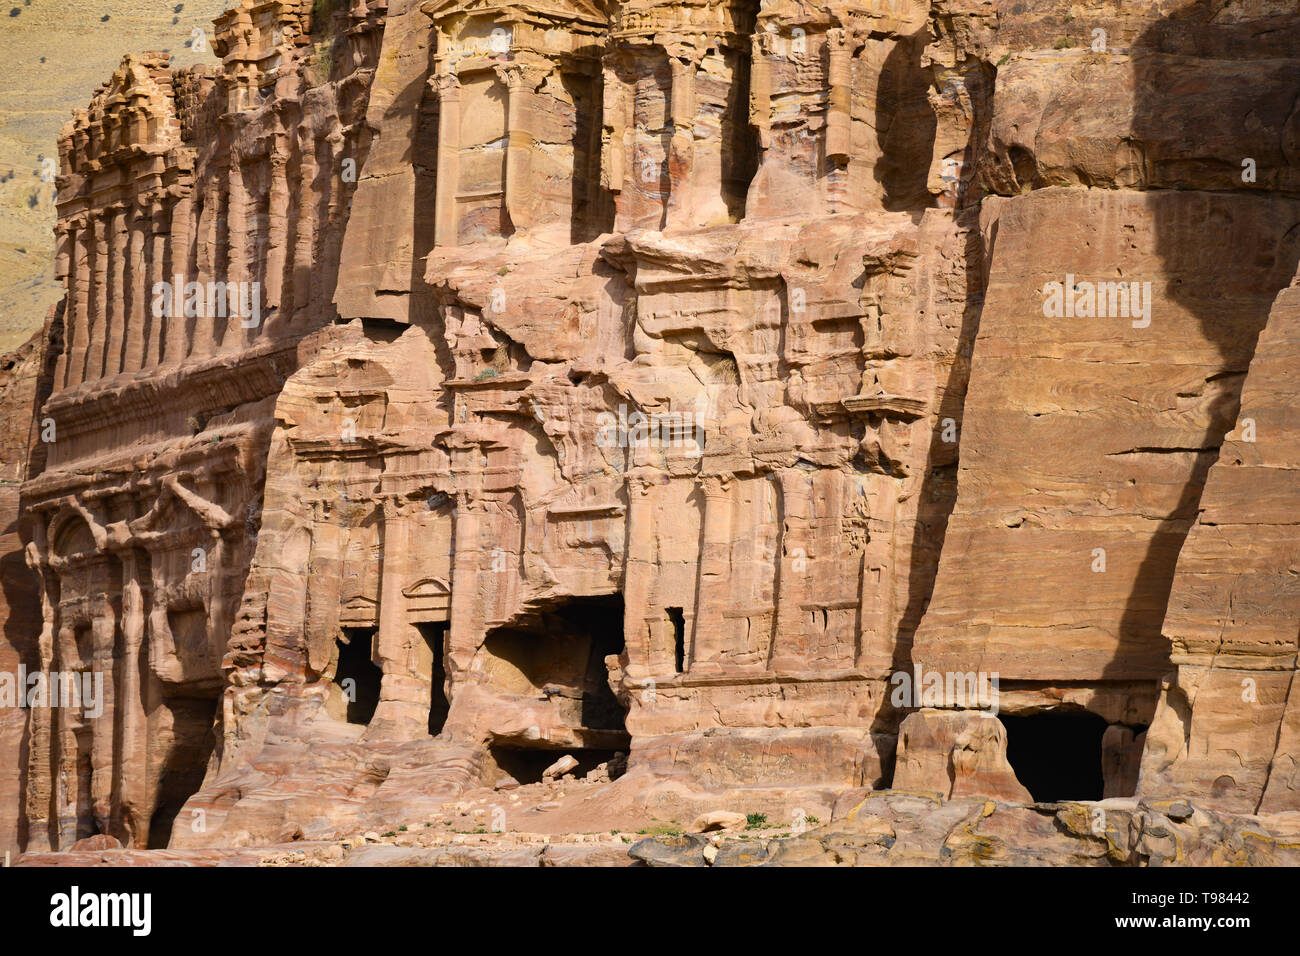 Stunning view of a huge temple carved in stone in the beautiful Petra site. Stock Photo